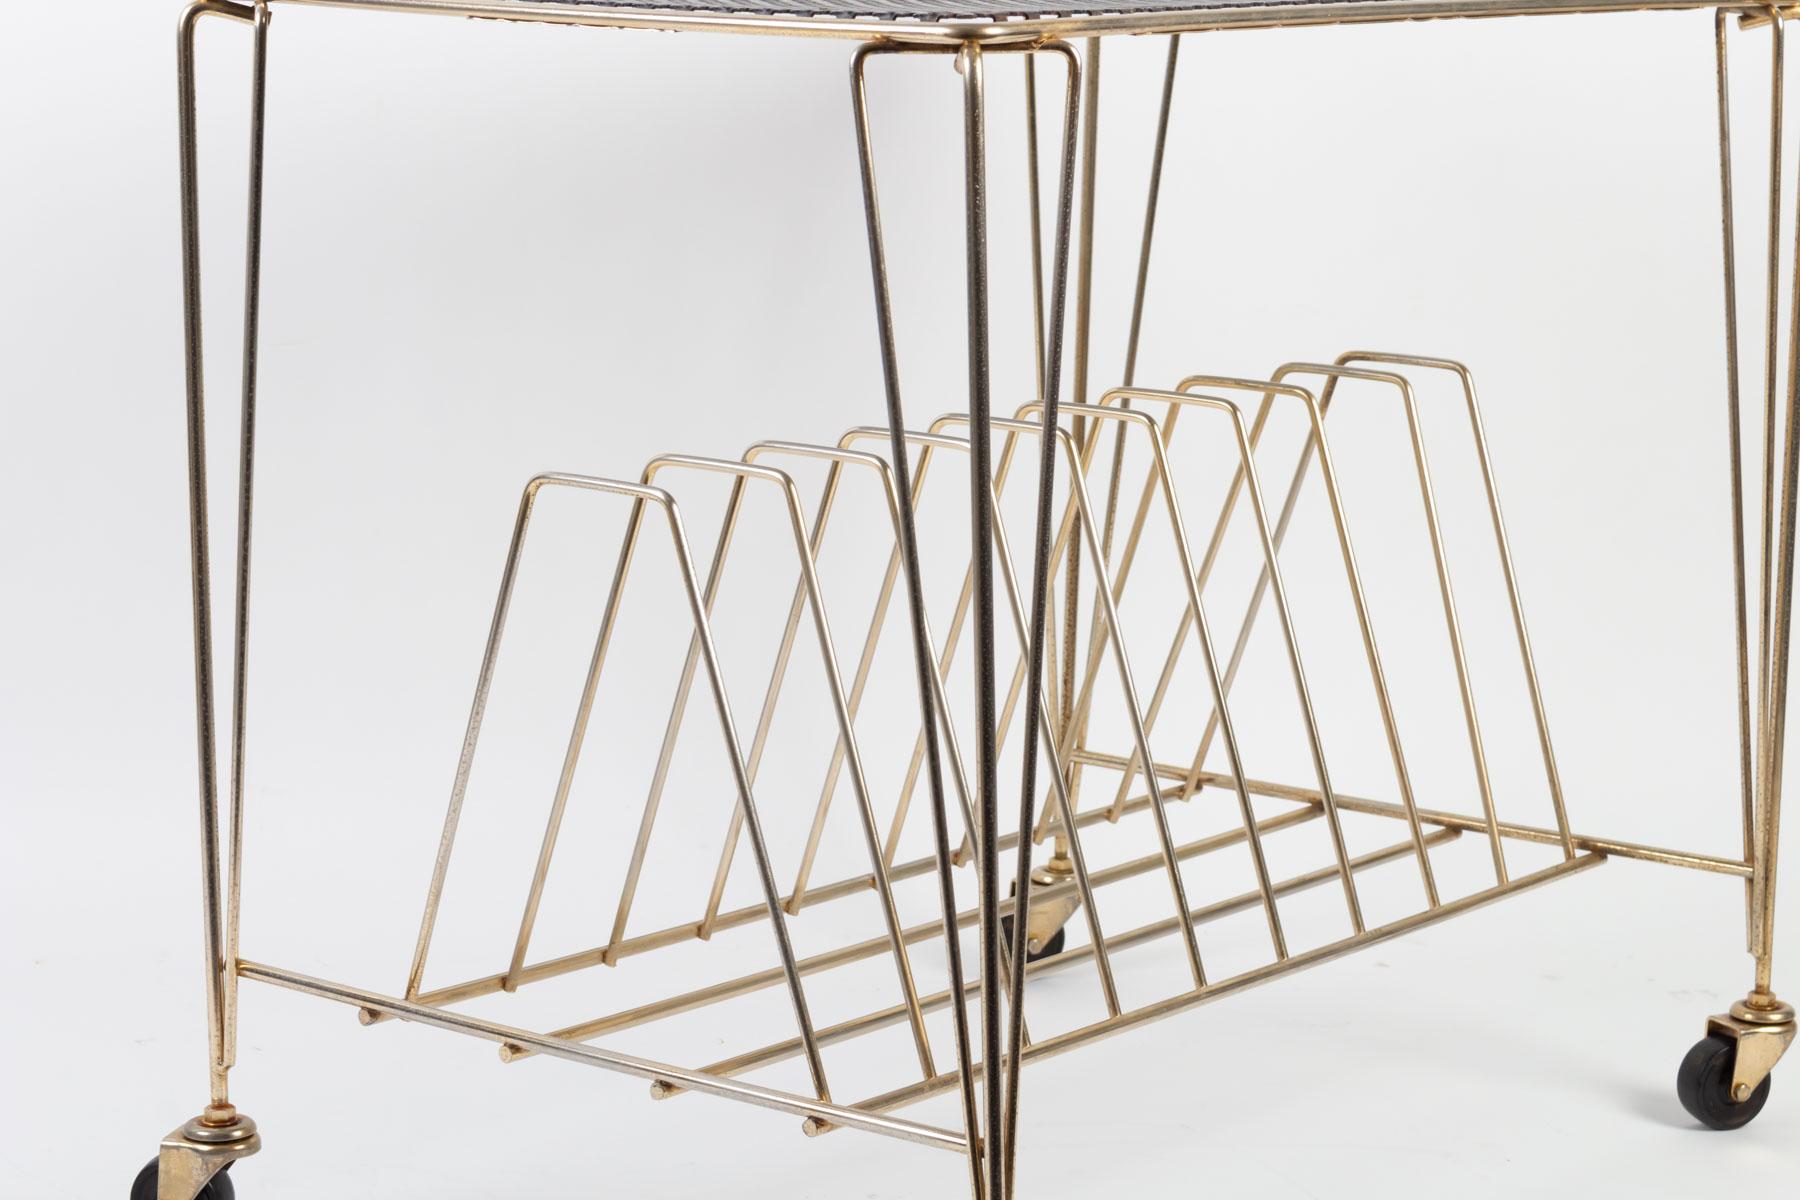 Painted metal and brass side table, 1960s, on casters.

Measures: H 51 cm, W 59 cm, D 40 cm.